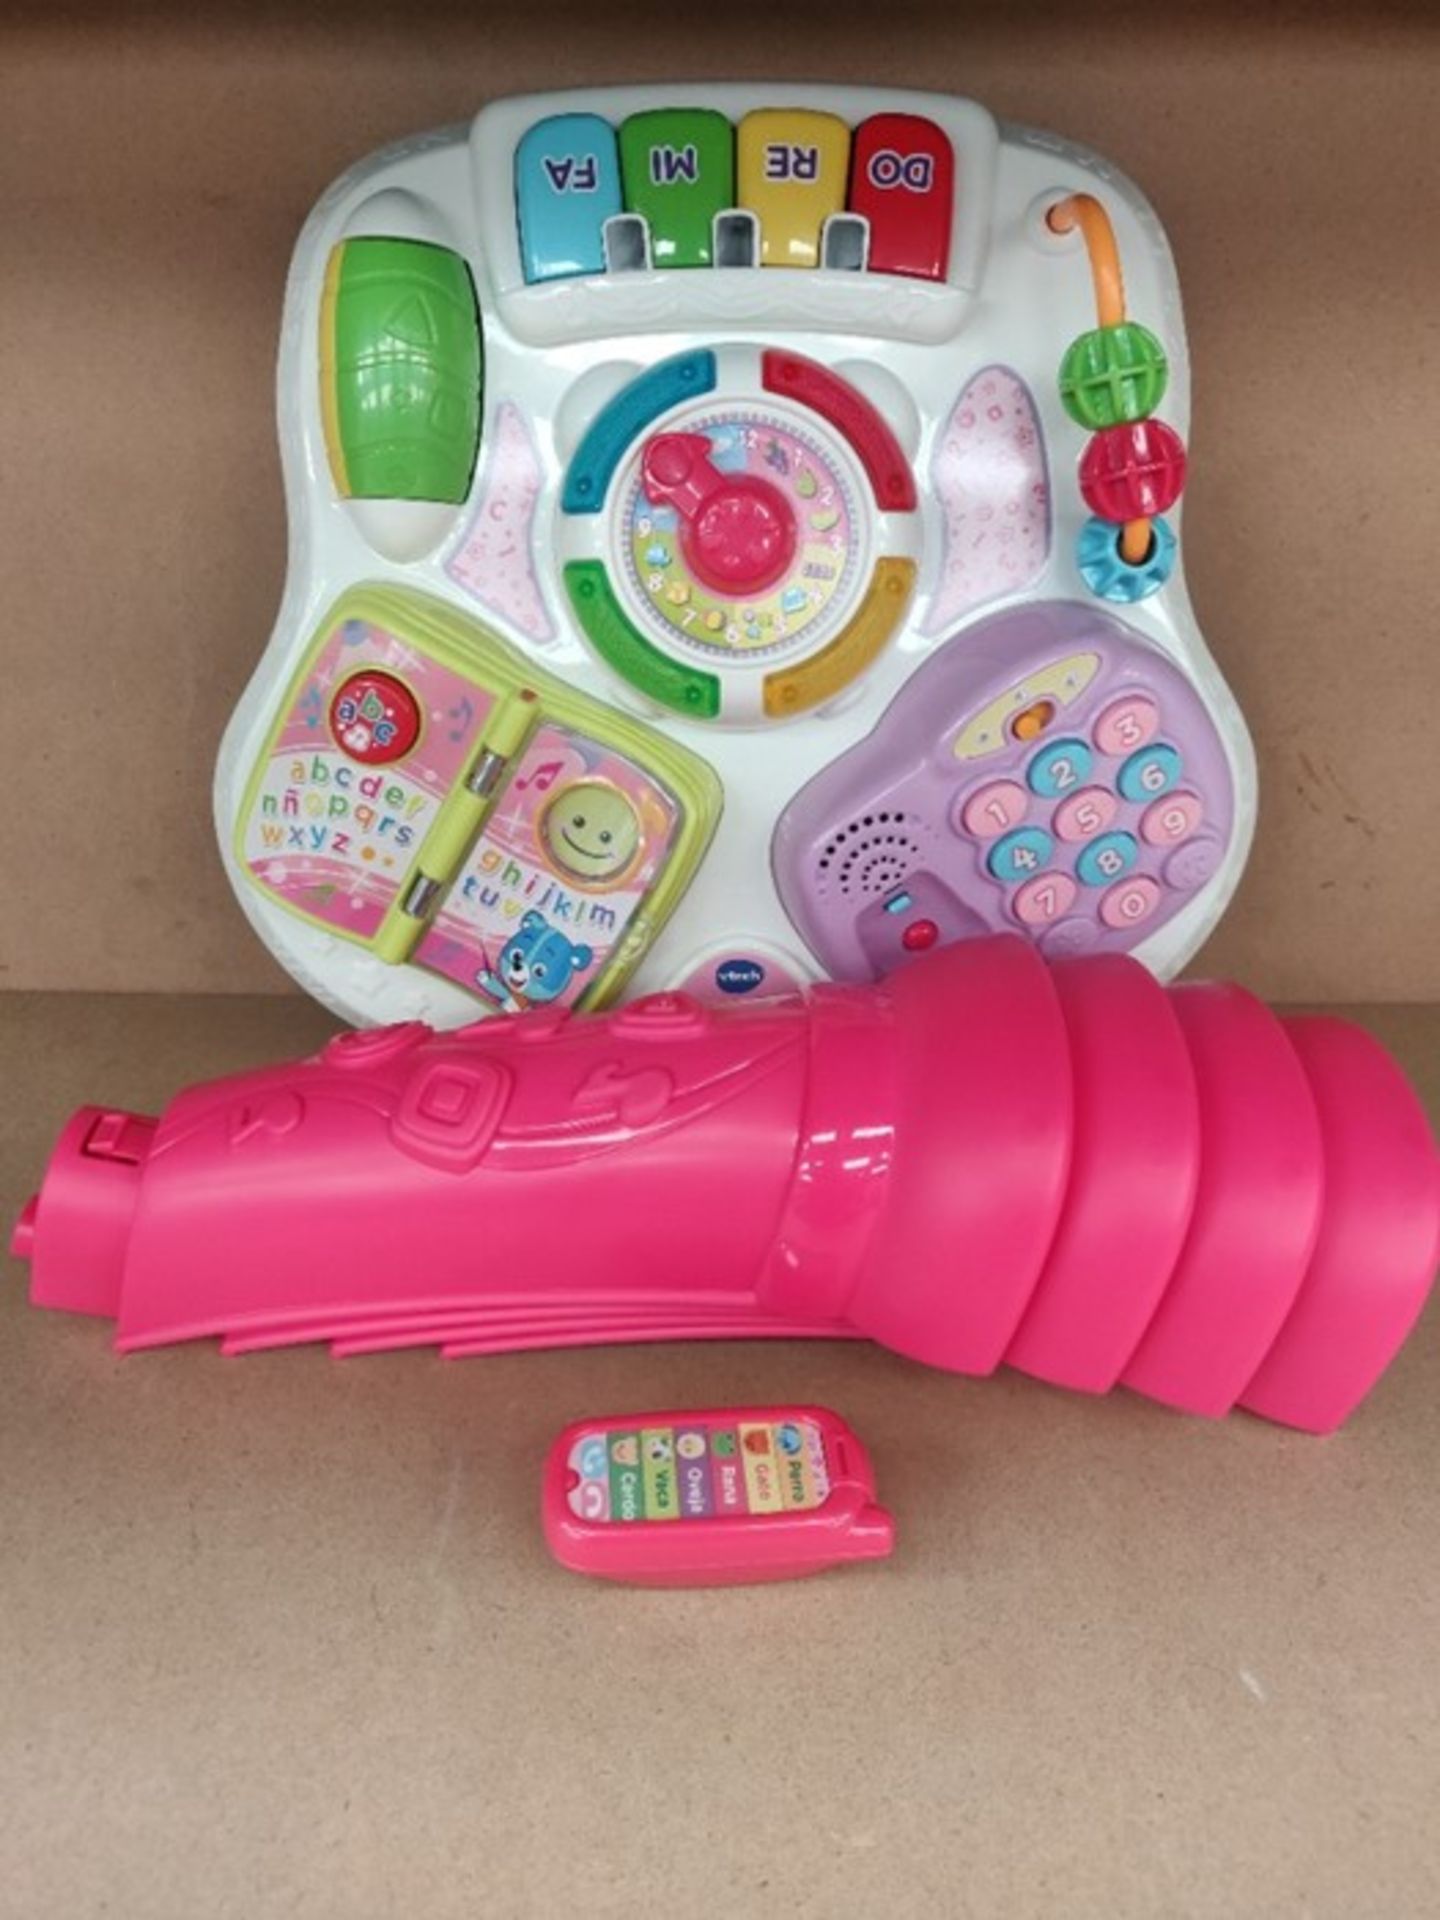 Vtech- 2-in-1 Talking Table, SPB, Pink (80-148087), Assorted Colour/Model - Image 2 of 2